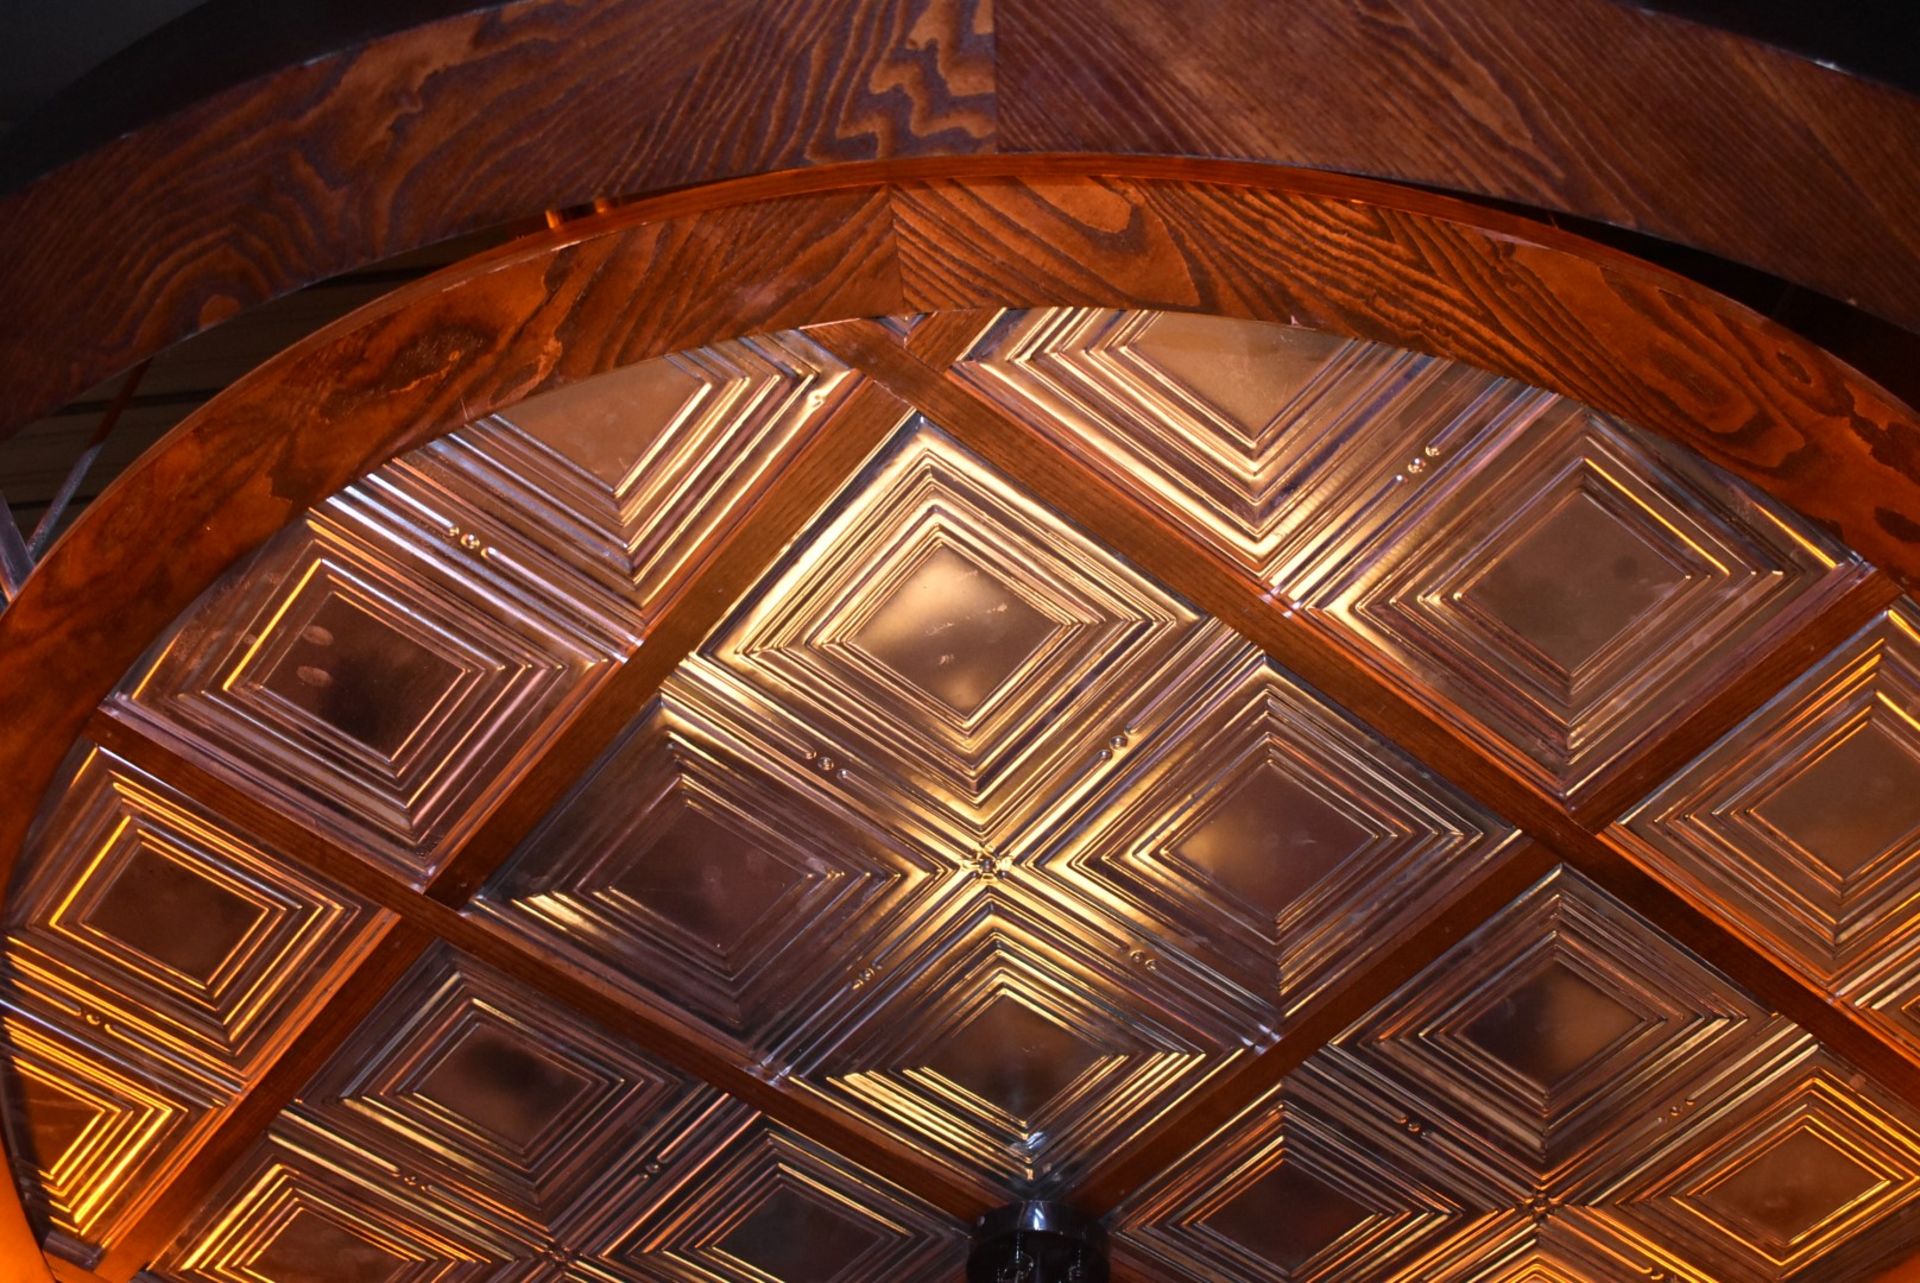 1 x Bespoke Suspended Round Ceiling Panel in Dark Wood With Panelling Inserts - Approx 2.6 Meter - Image 2 of 6